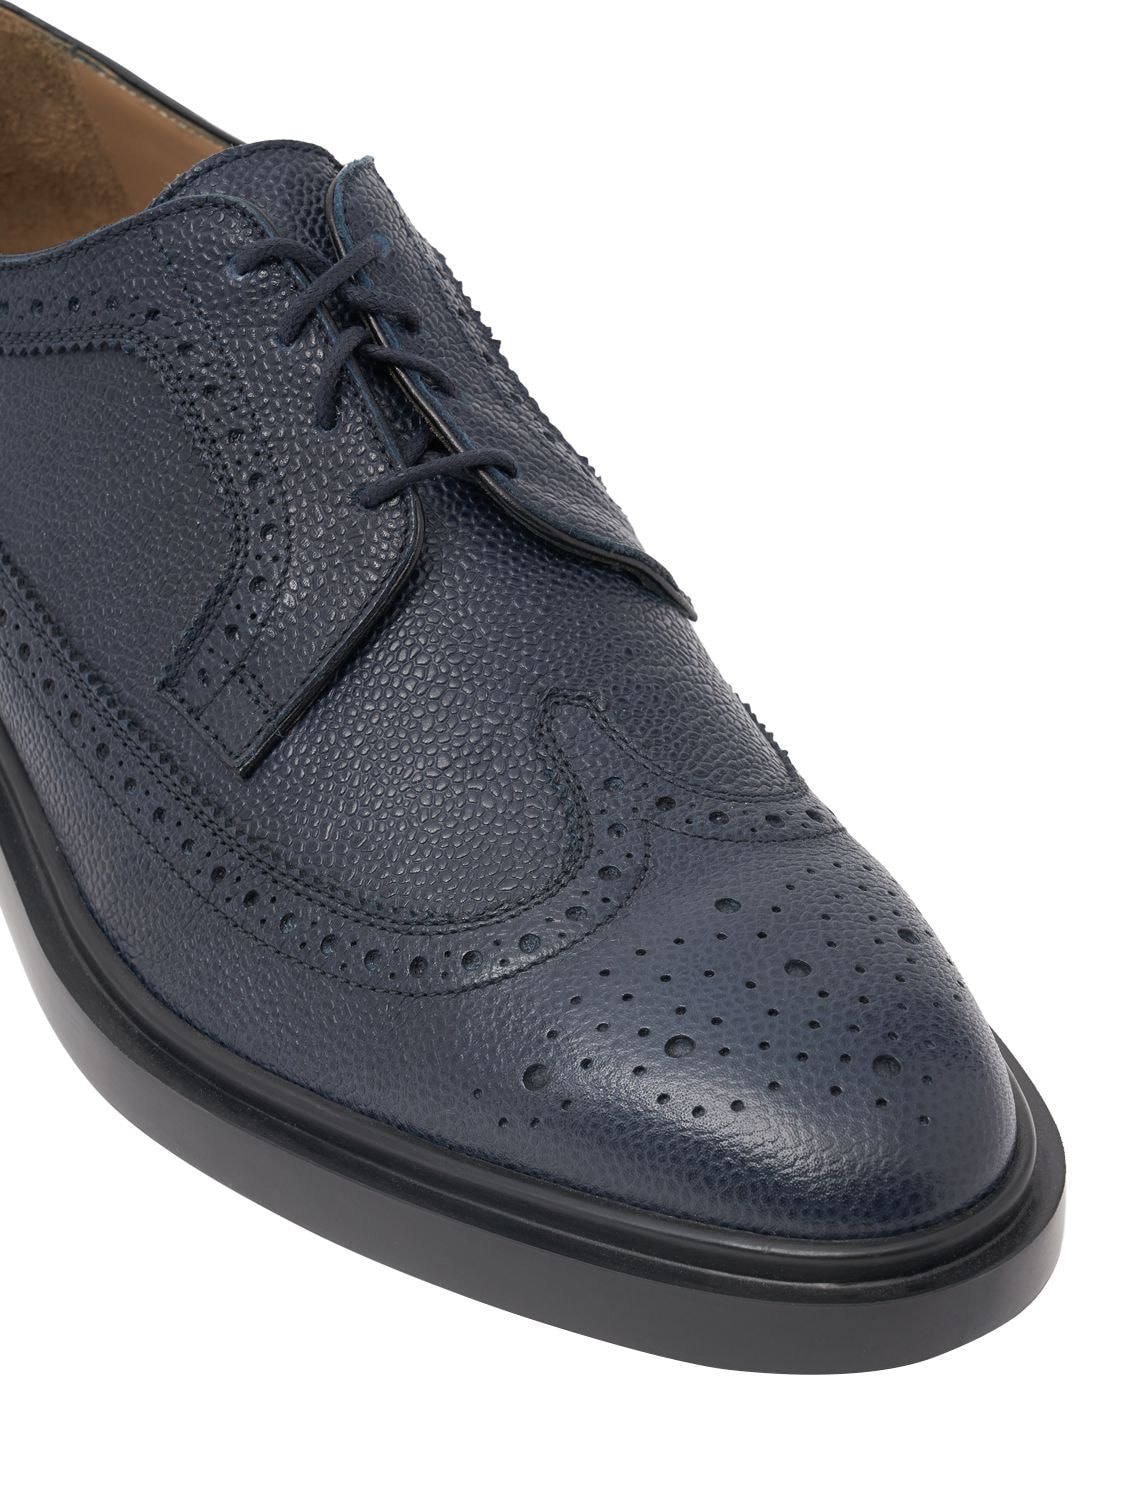 Shop Thom Browne Classic Leather Lace-up Shoes In Navy